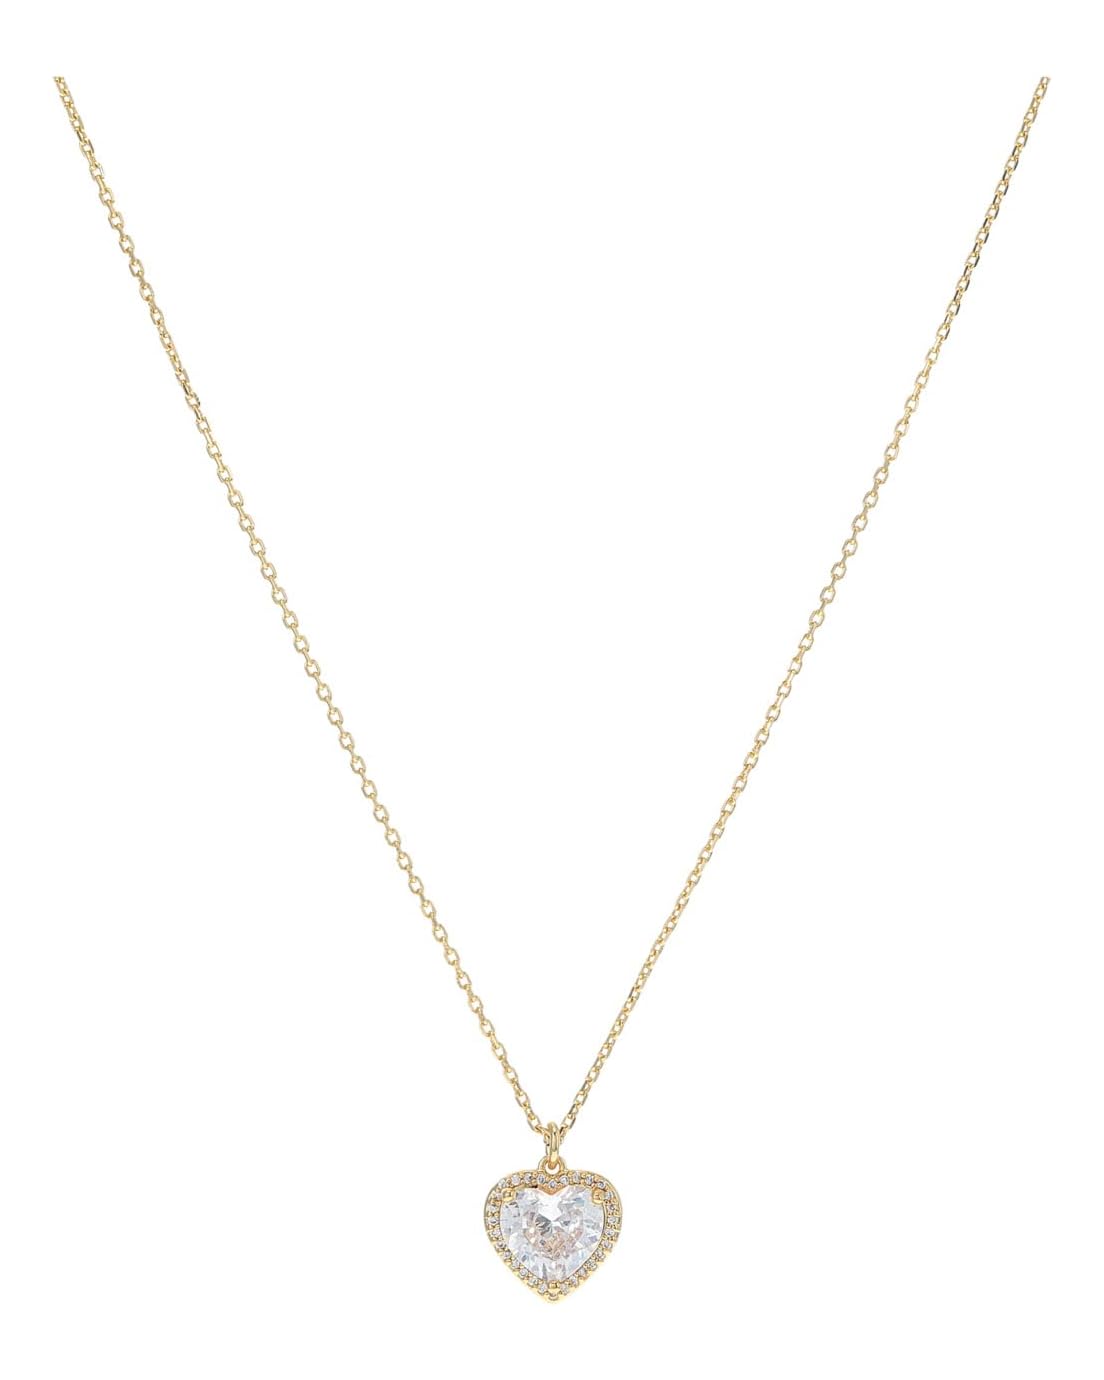 Kate Spade New York My Love Pave Heart Pendant Necklace